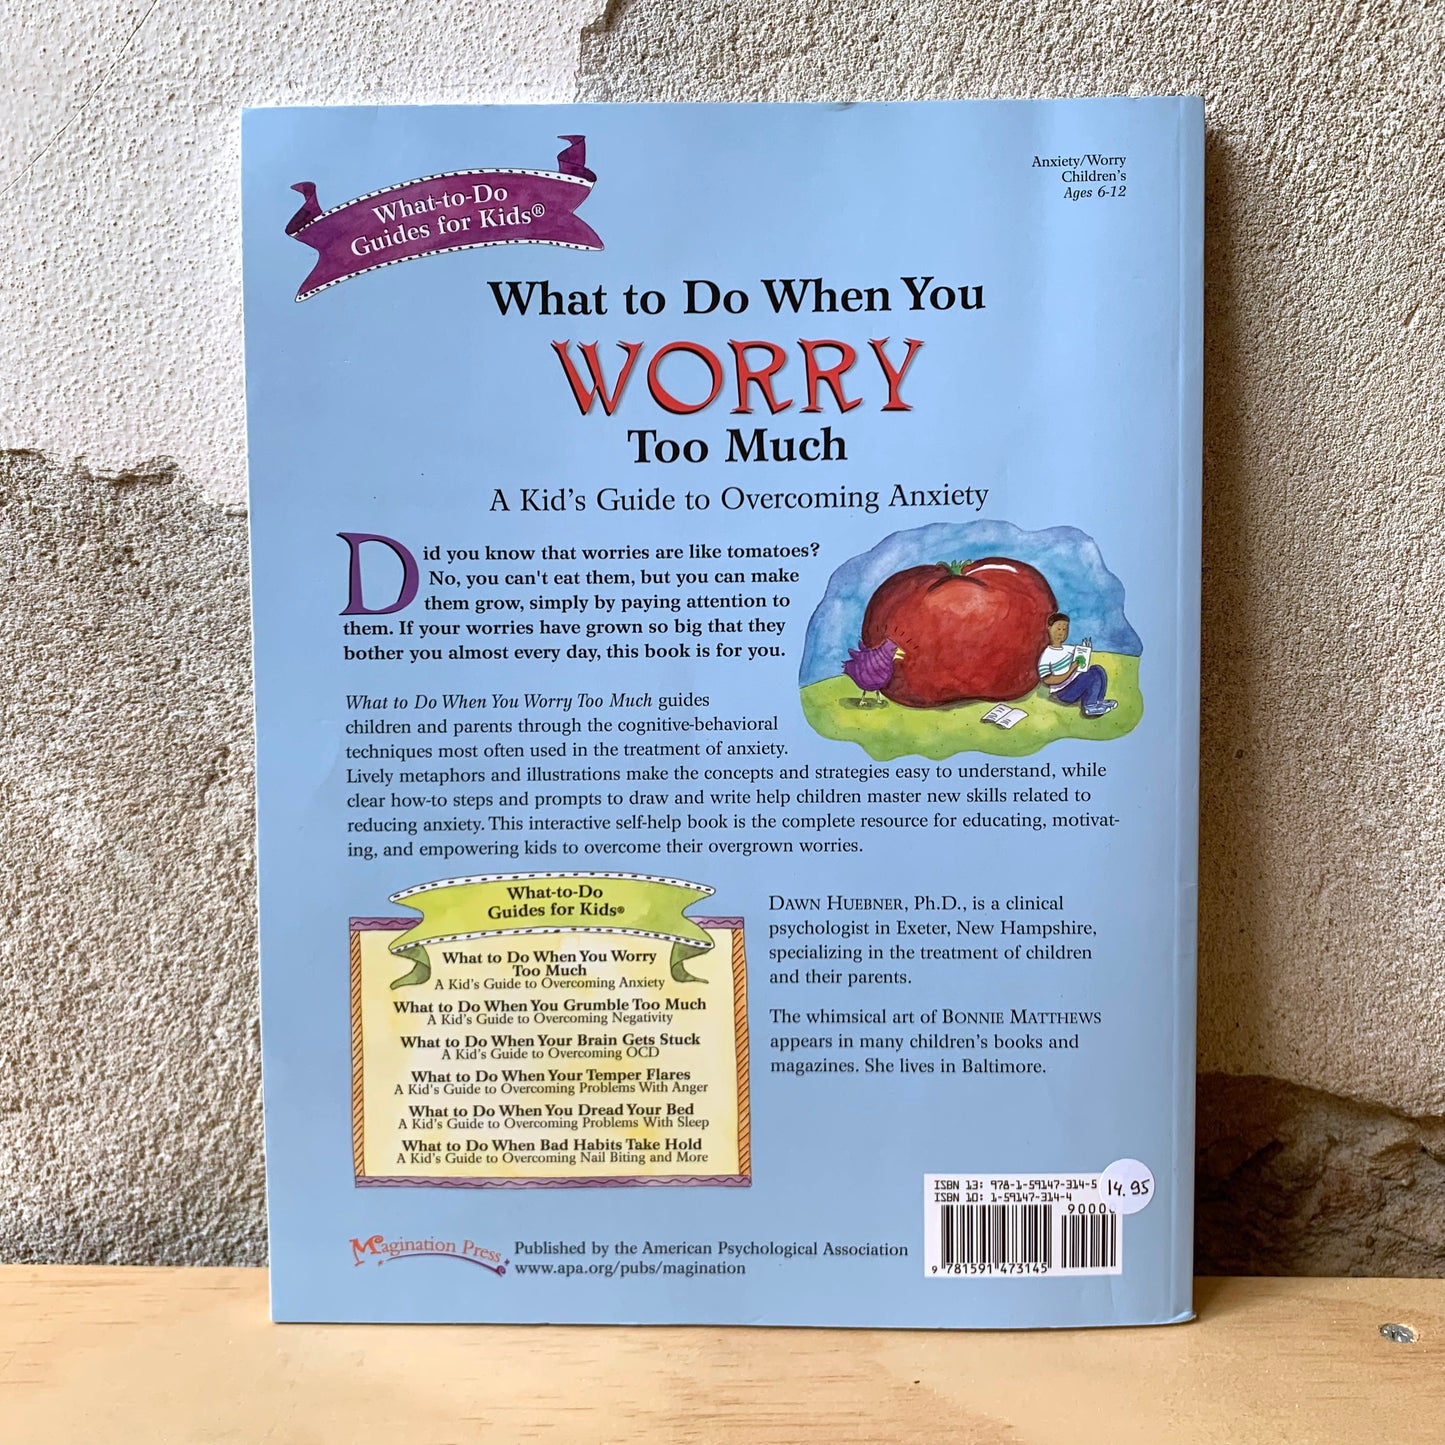 What to Do When You Worry Too Much: A Kid's Guide to Overcoming Anxiety – Dawn Huebner